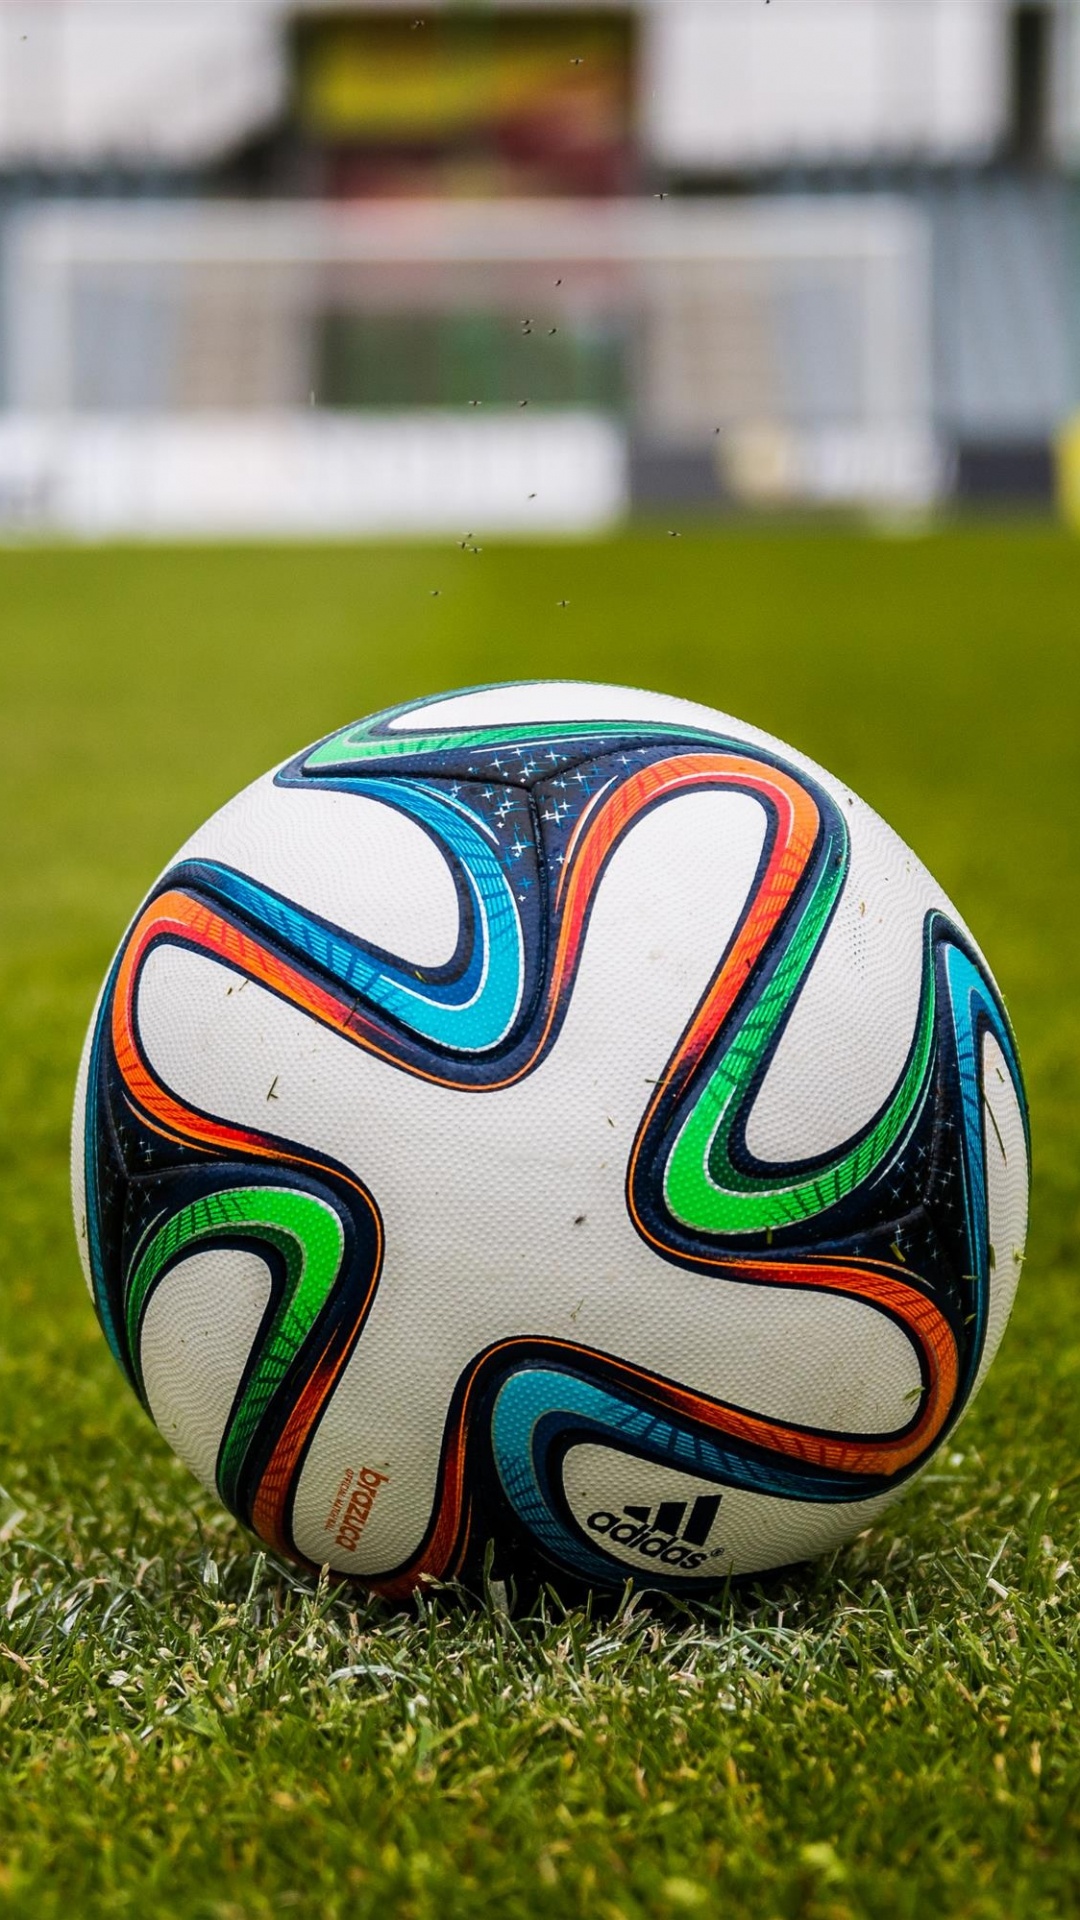 White Blue and Red Soccer Ball on Green Grass Field During Daytime. Wallpaper in 1080x1920 Resolution